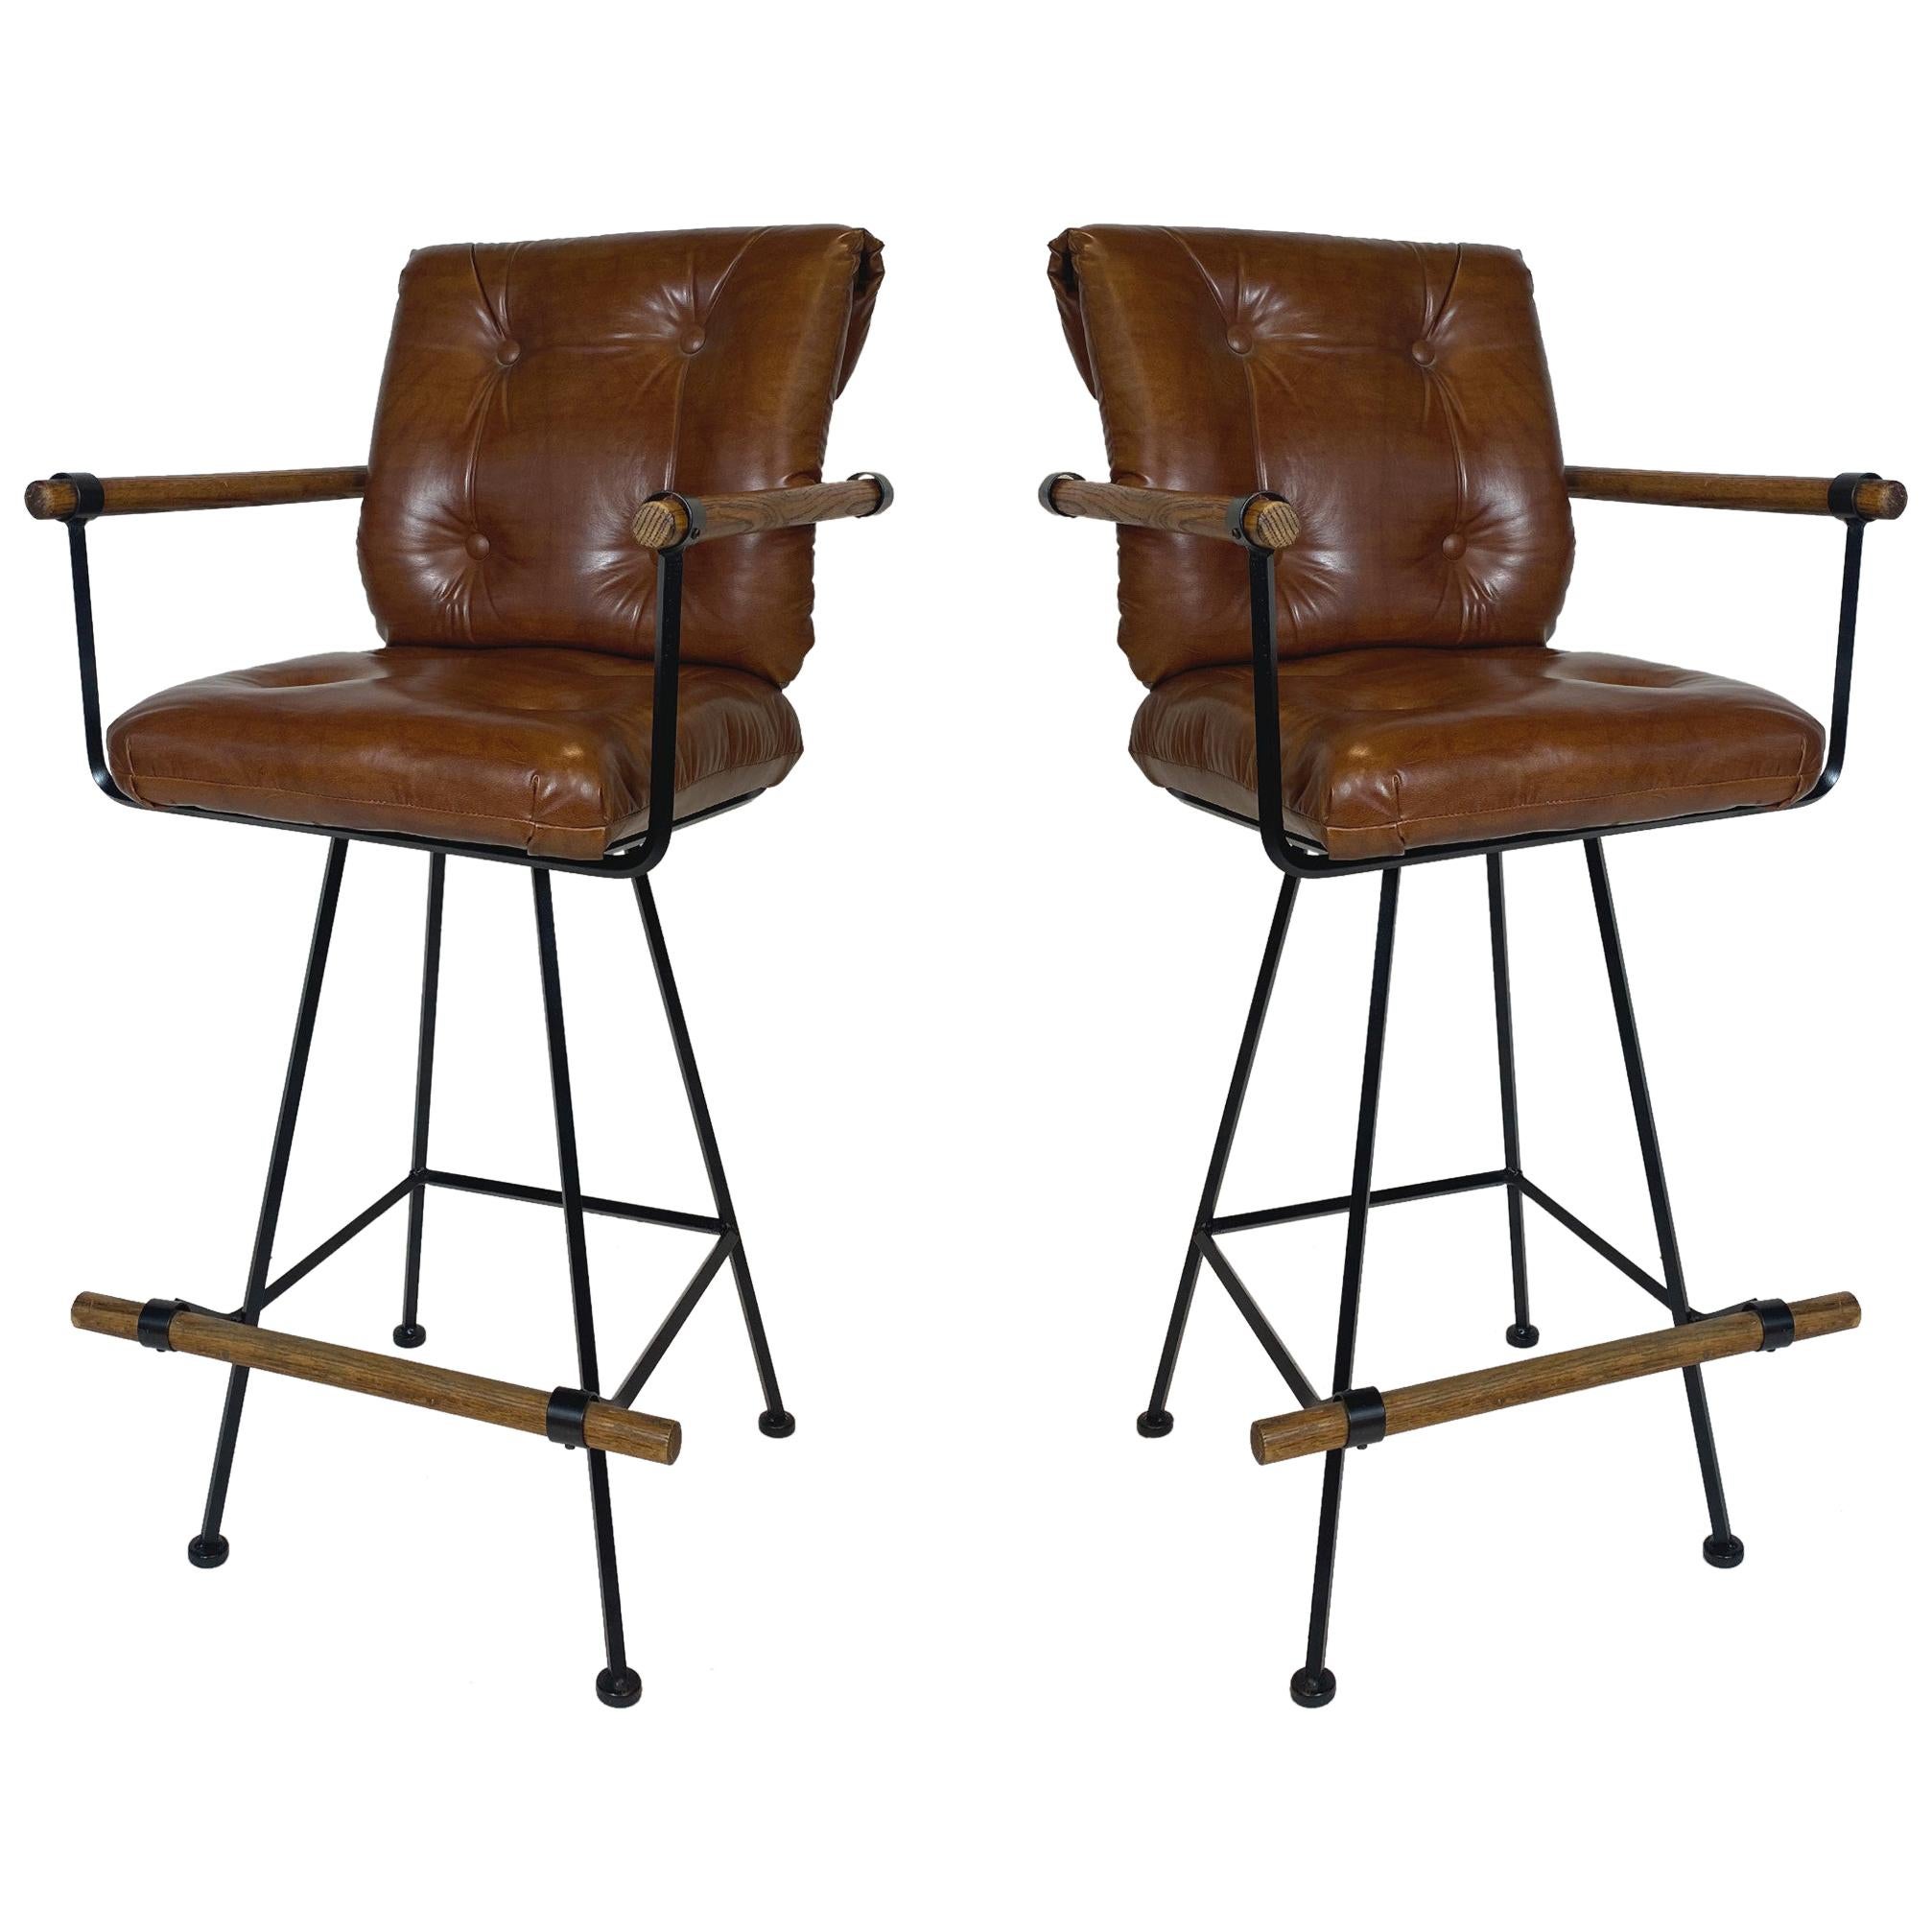 Rare Pair of Billiard Stools with Arms by Cleo Baldon for Terra